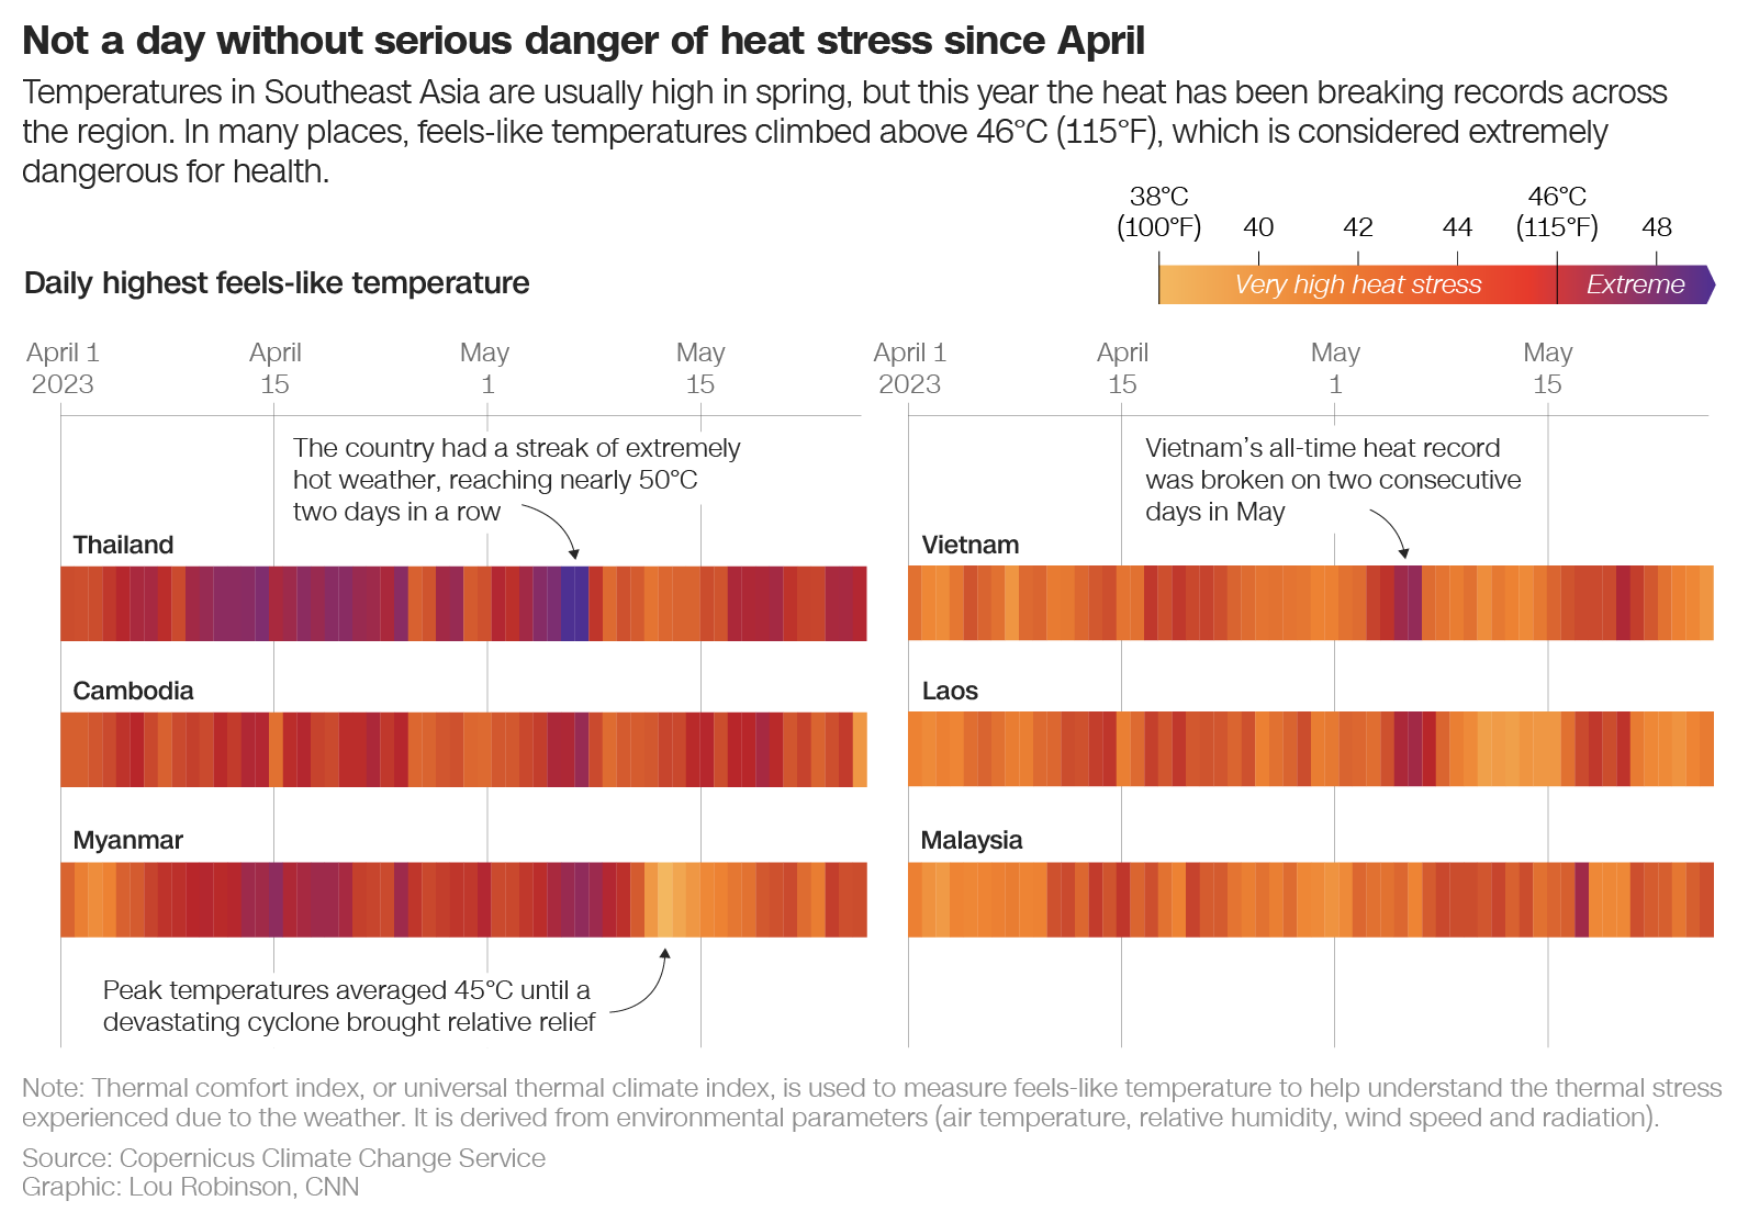 Daily highest feels-like temperatures in Southeast Asia in April and May 2023. In many places, feels-like temperatures exceeded 46°C (115°F), which is considered extremely dangerous to health. Data: Copernicus Climate Change Service. Graphic: Lou Robinson / CNN